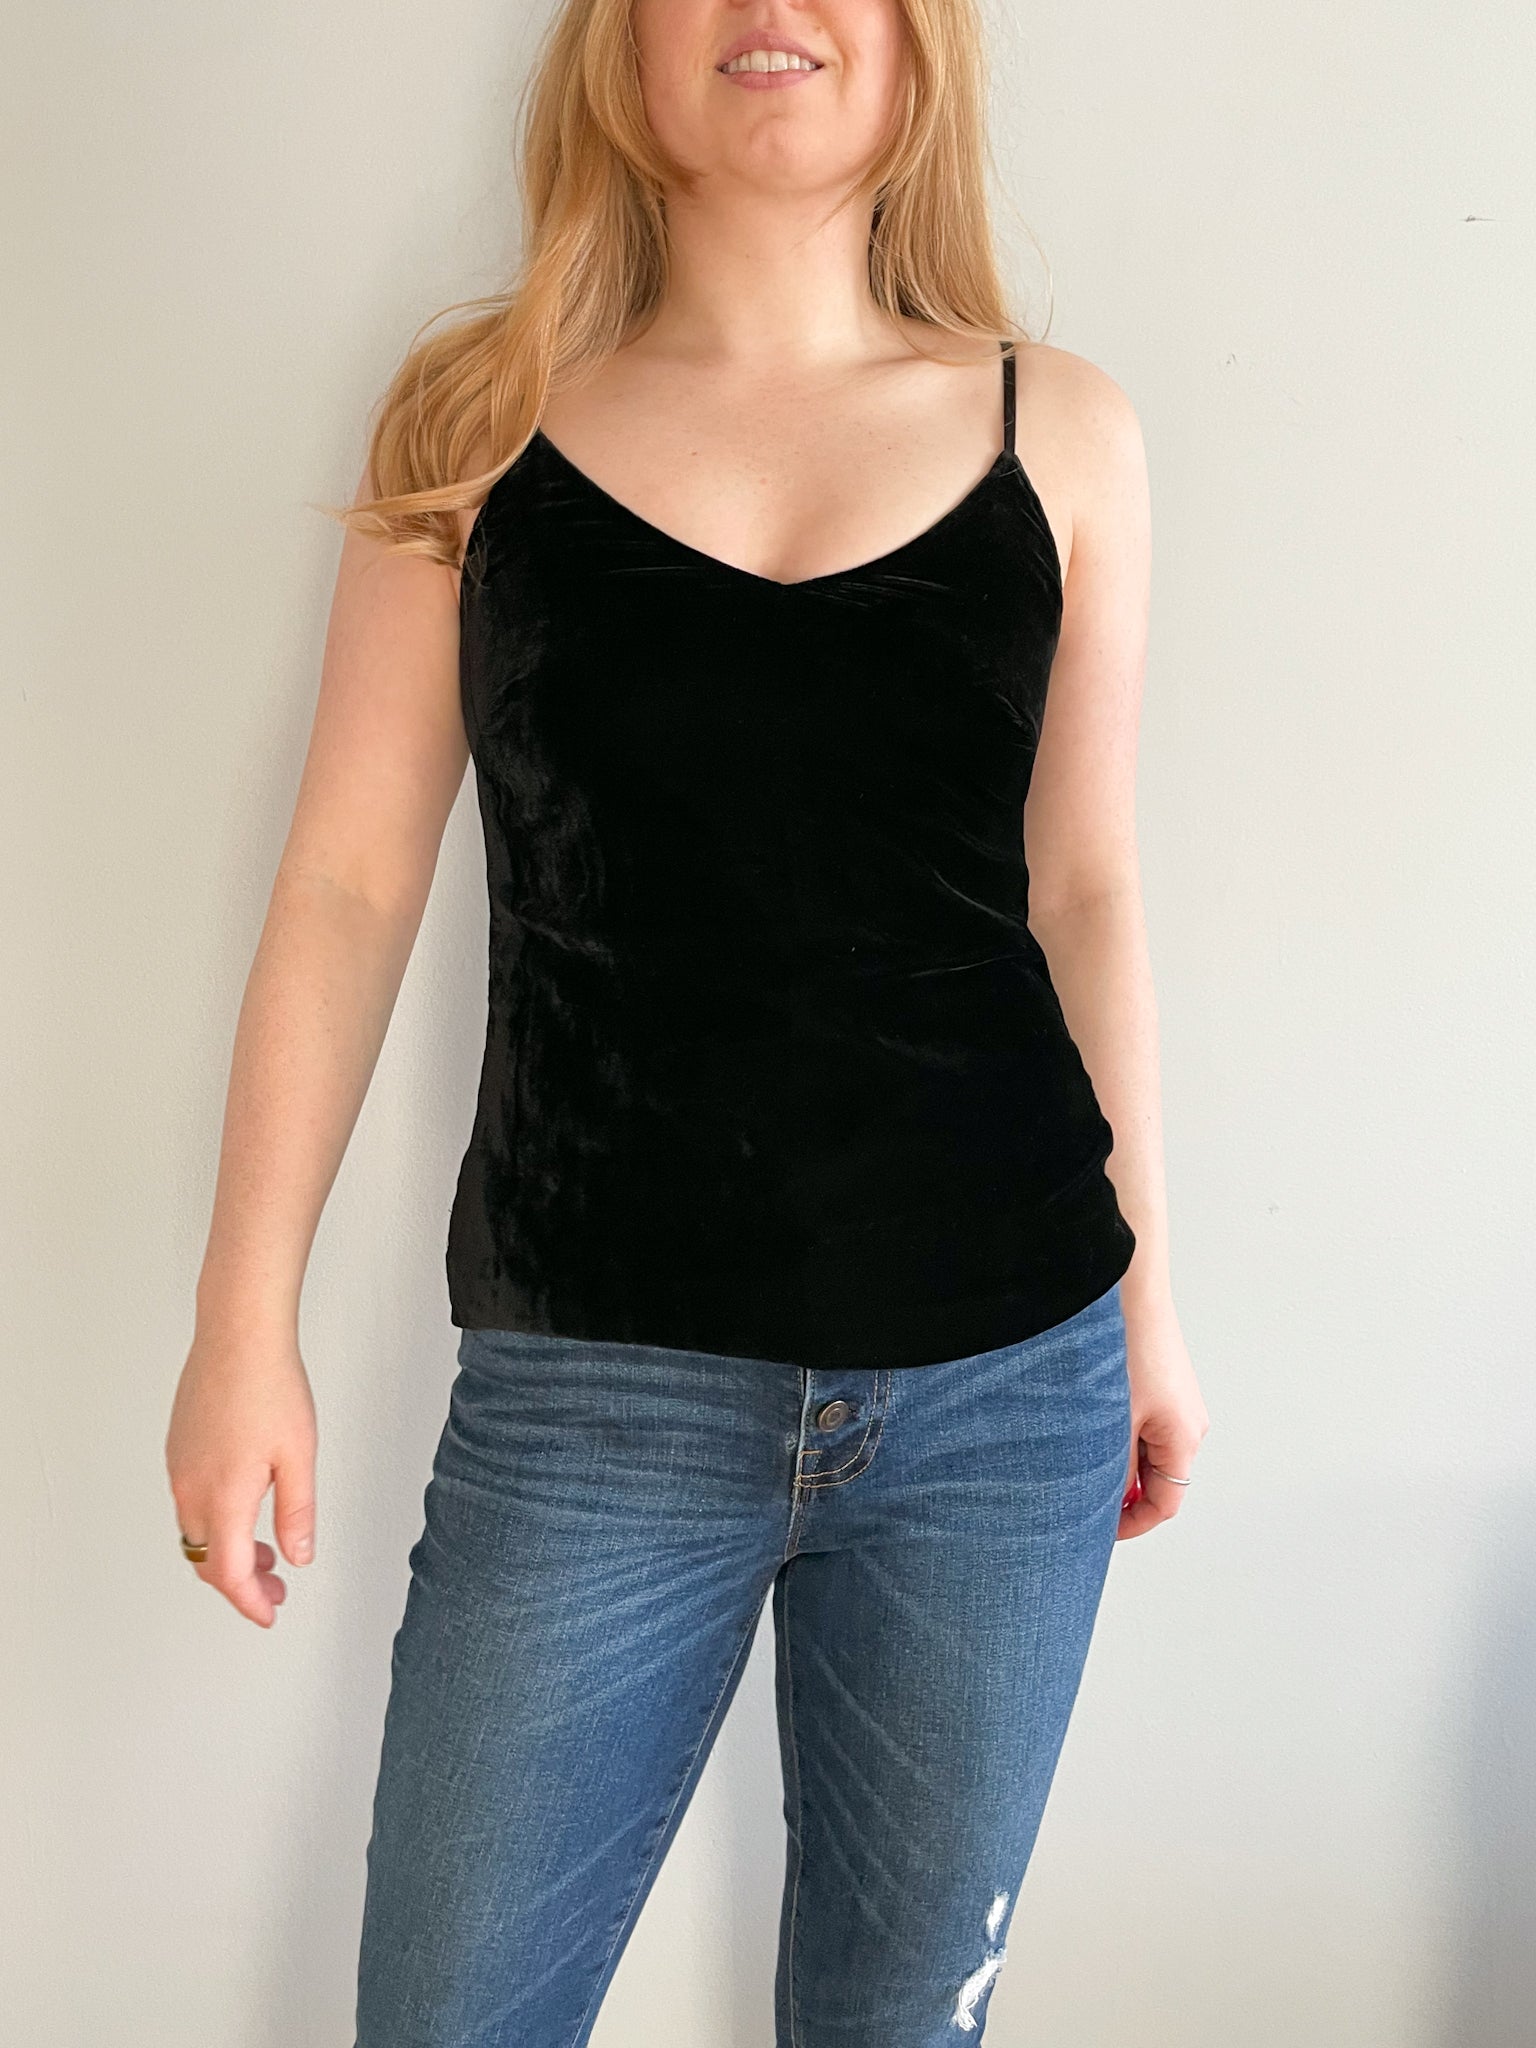 Scripted Black Velvet Camisole Tank Top - XS – Le Prix Fashion & Consulting